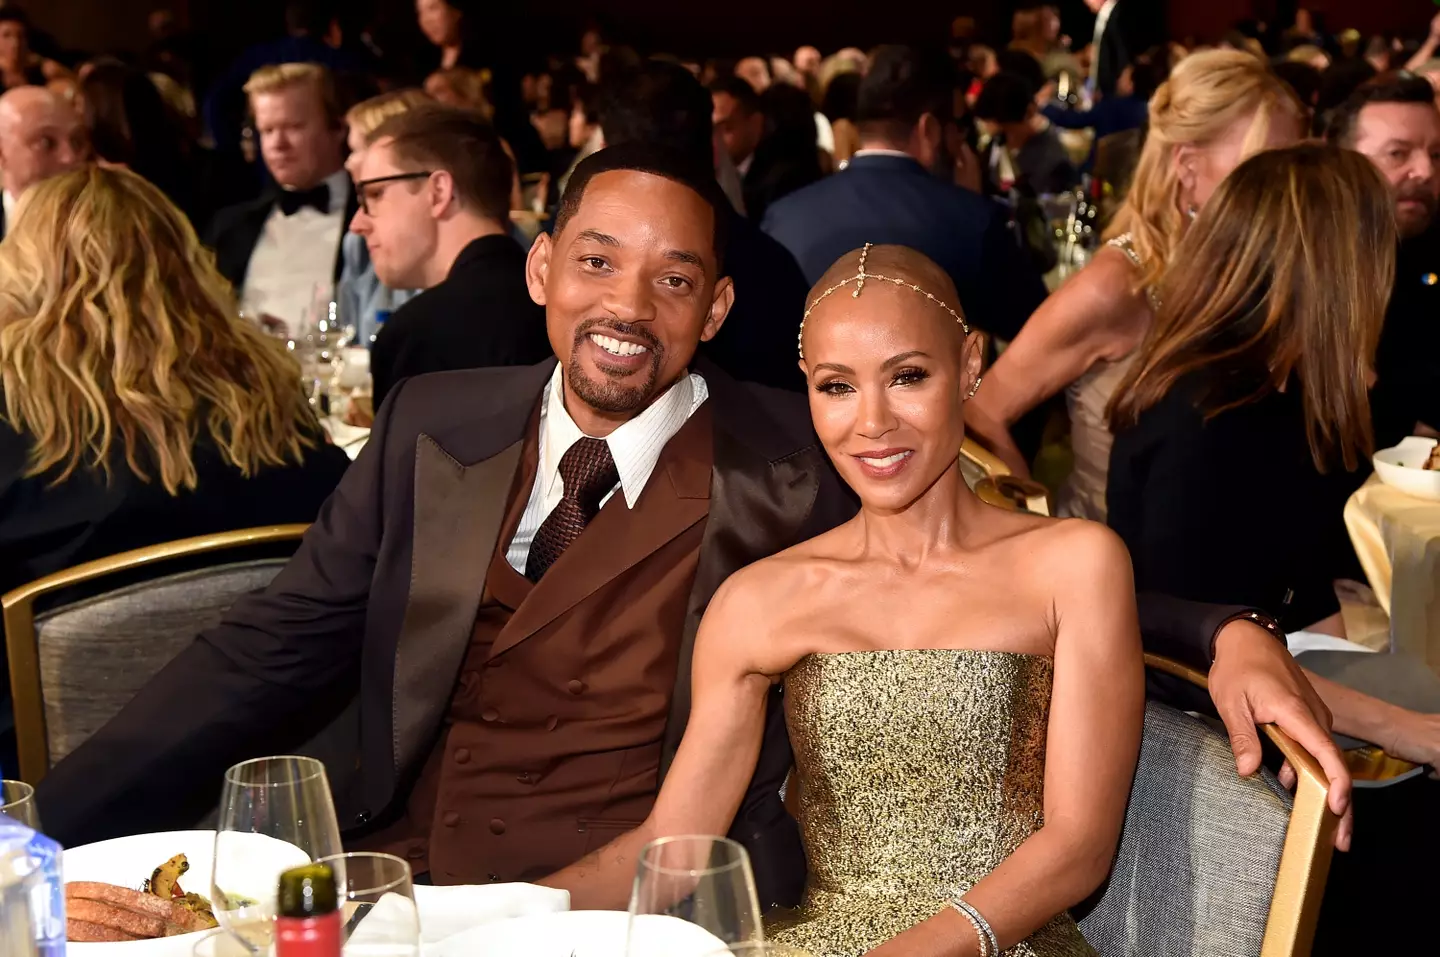 Jada Pinkett Smith's memoir revealed that her and Will separated in 2016.